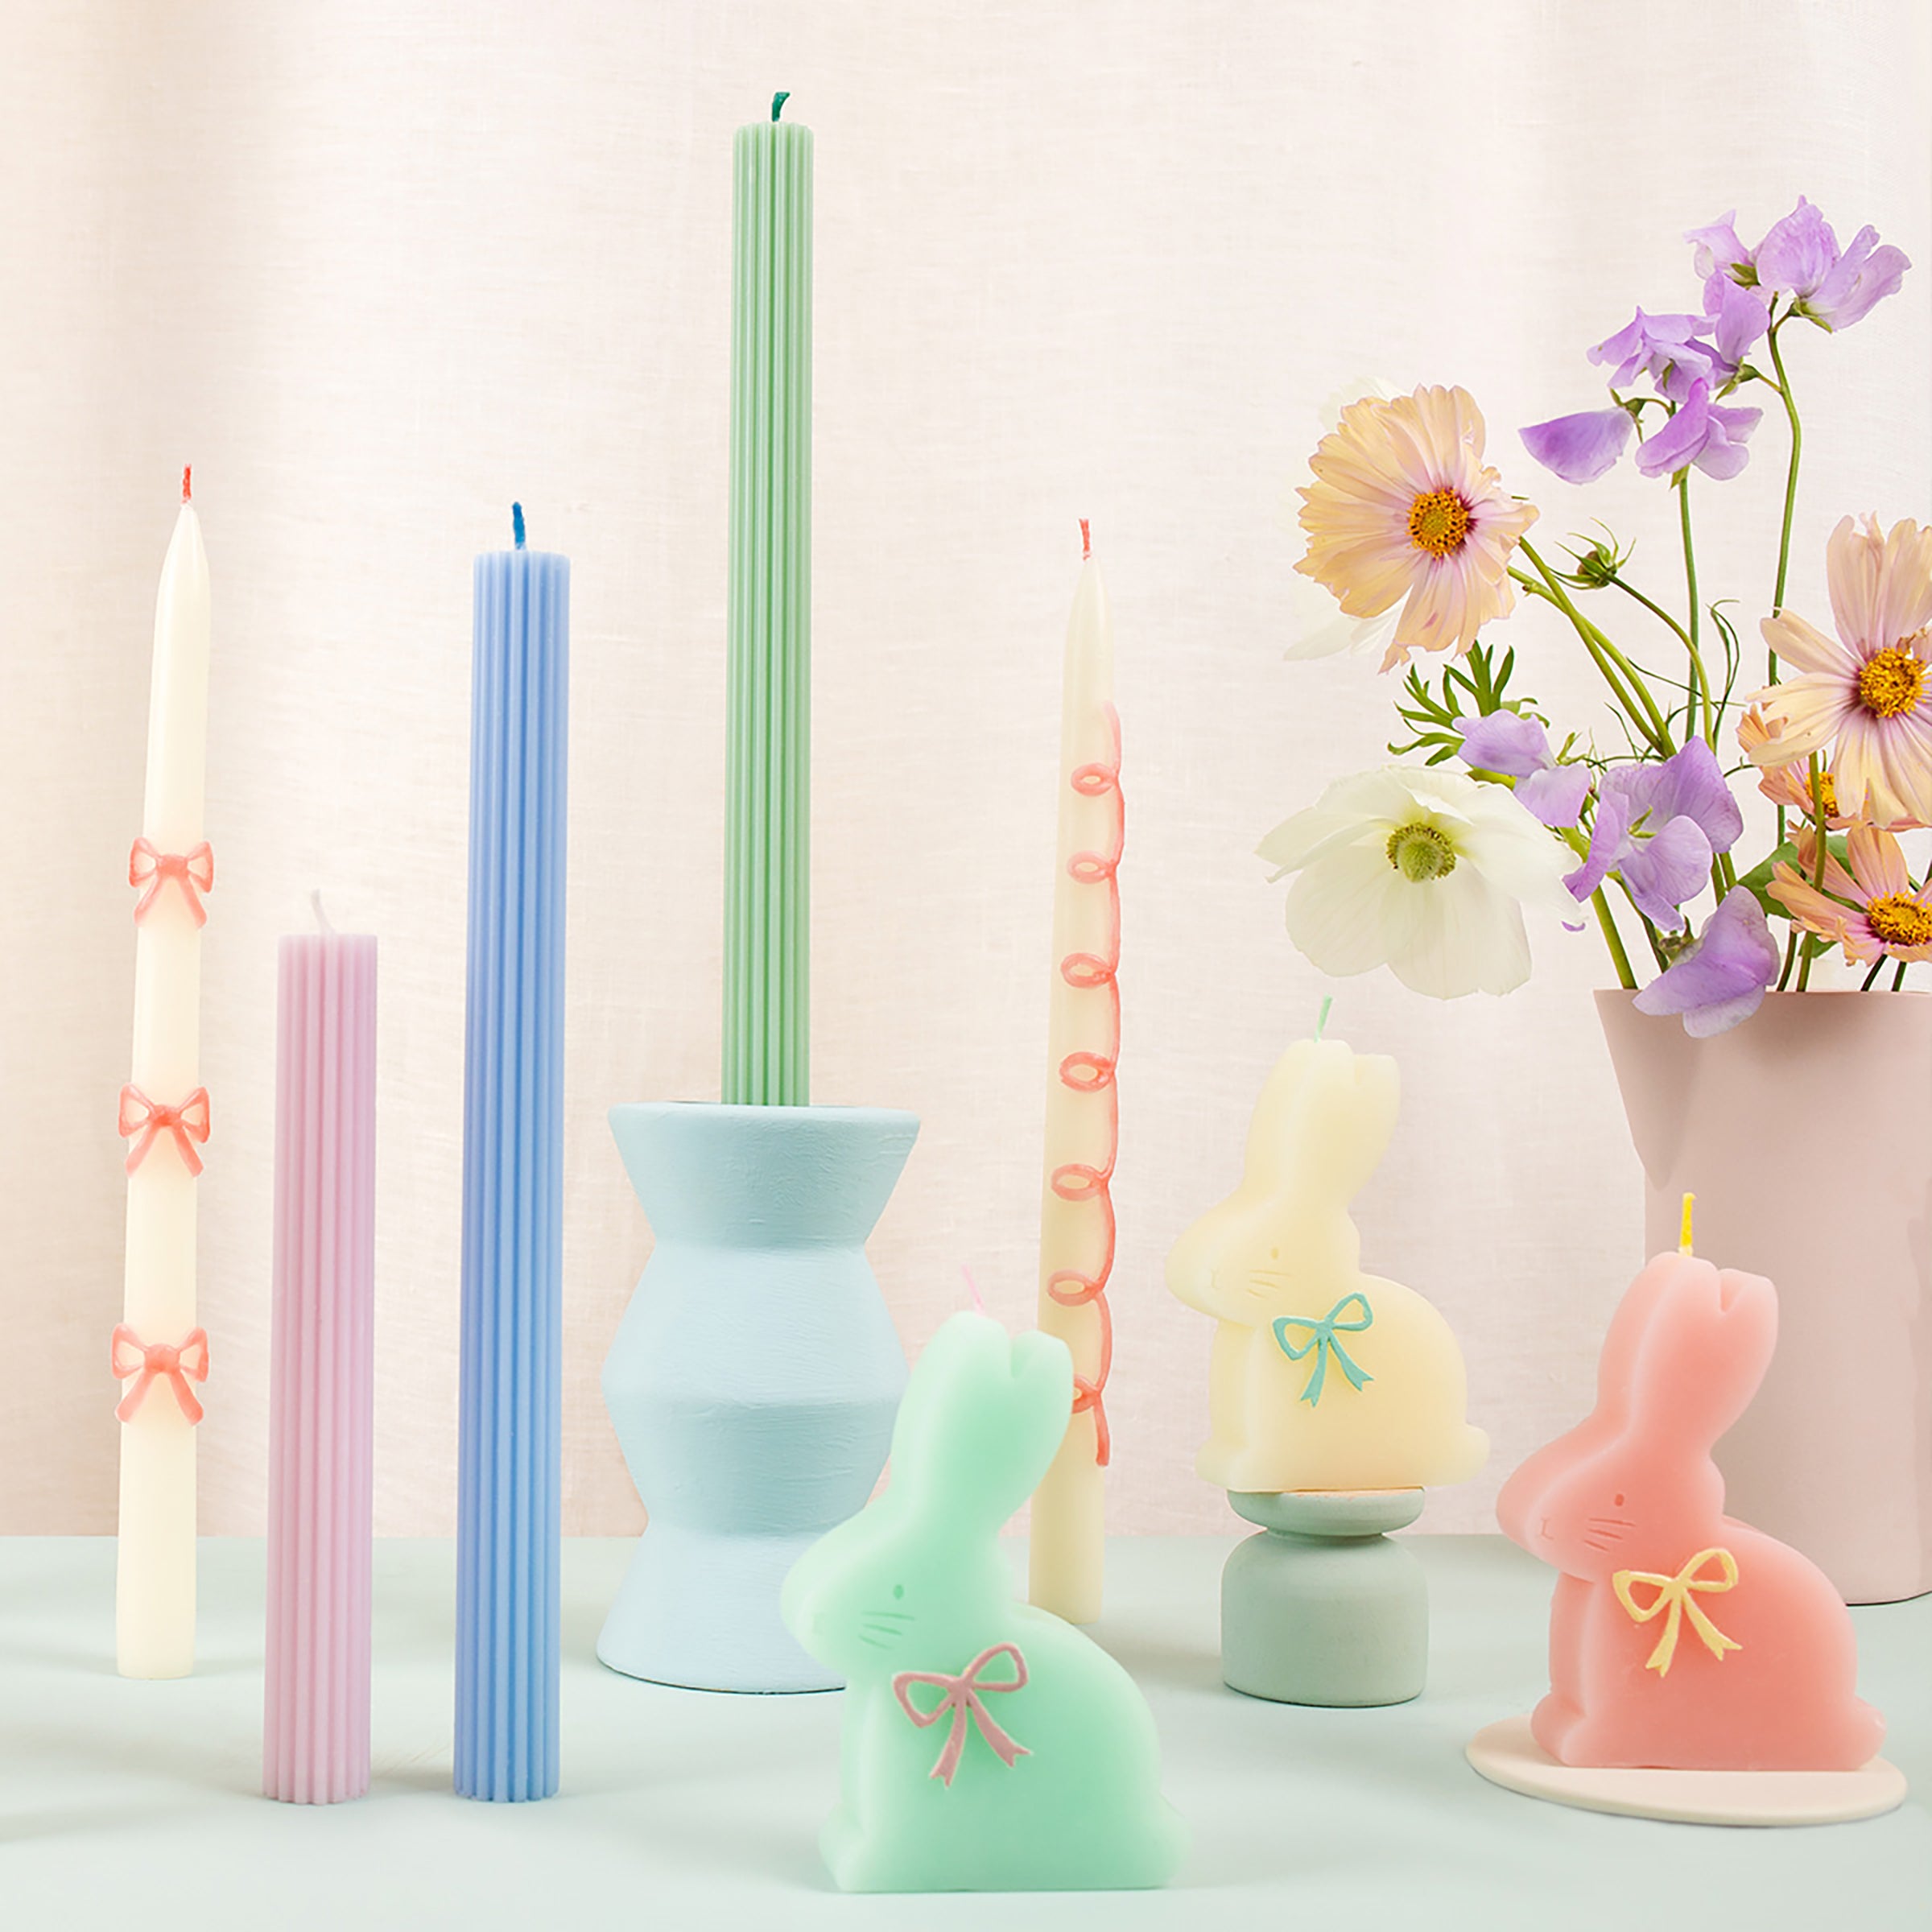 Our party candles, with a fabulous tapered candle shape, look amazing on the party table or mantel.